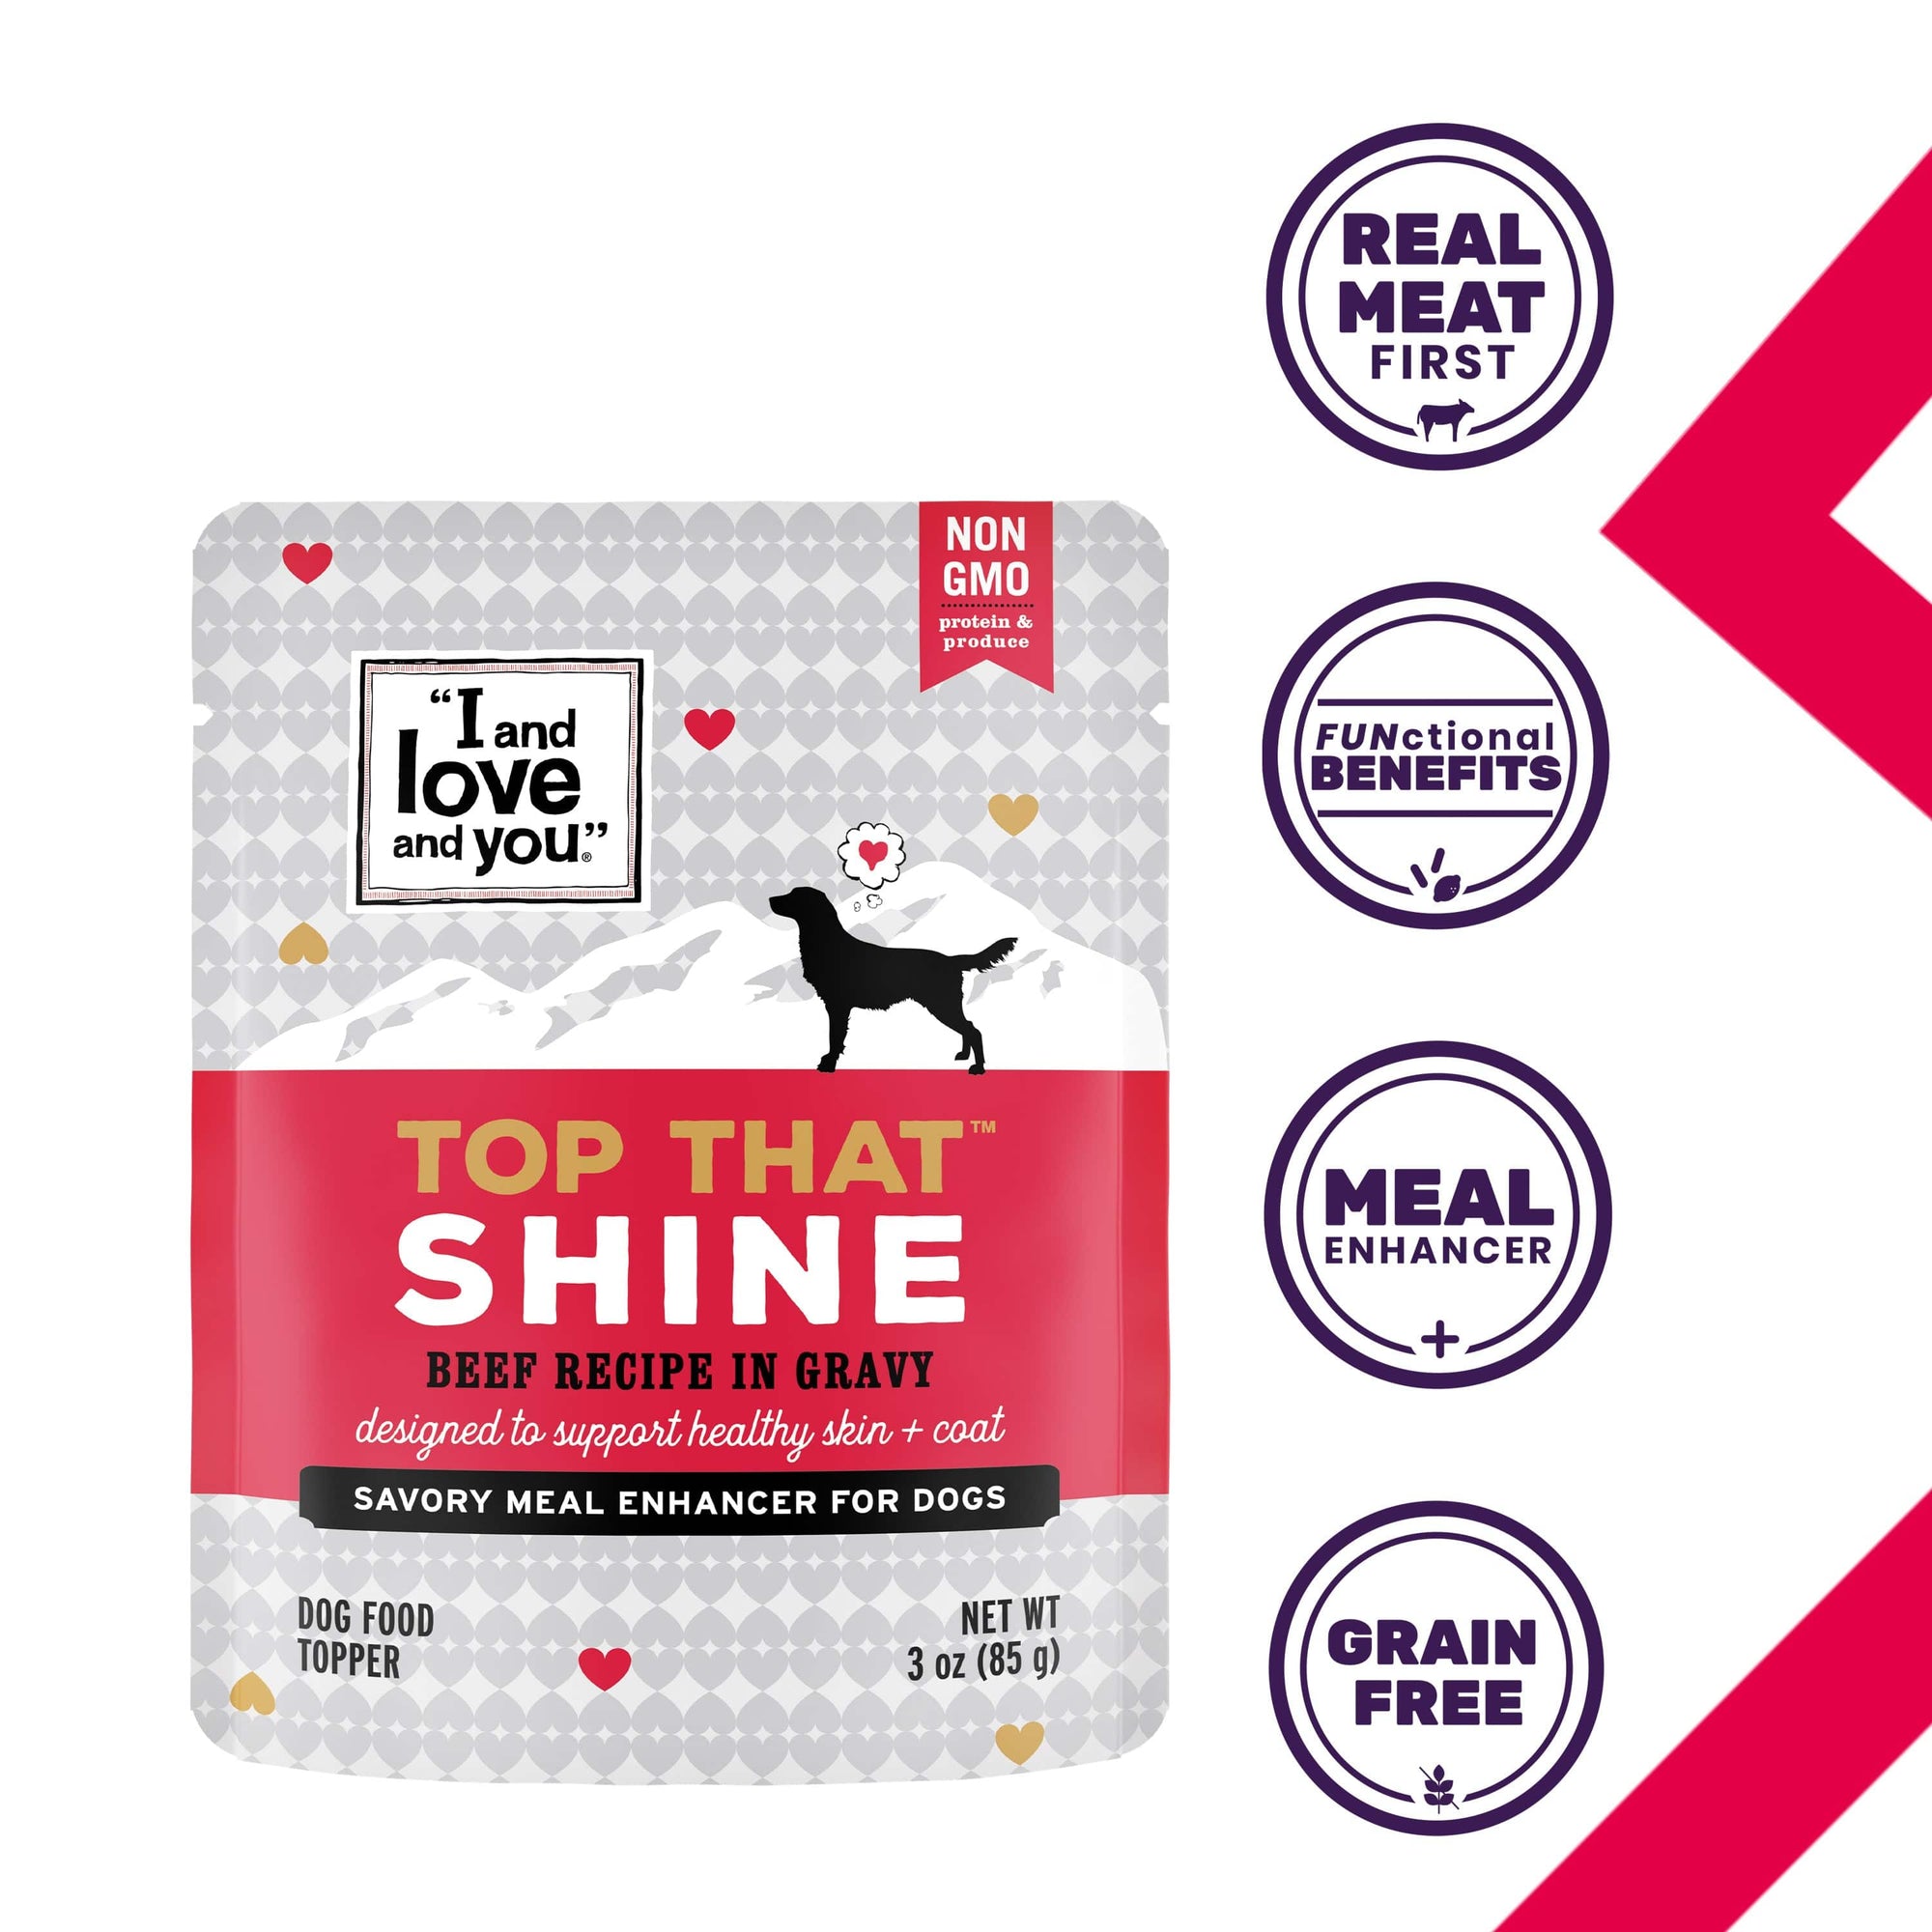 Silhouette of a dog with a package of dog food and a logo of a cow and text.